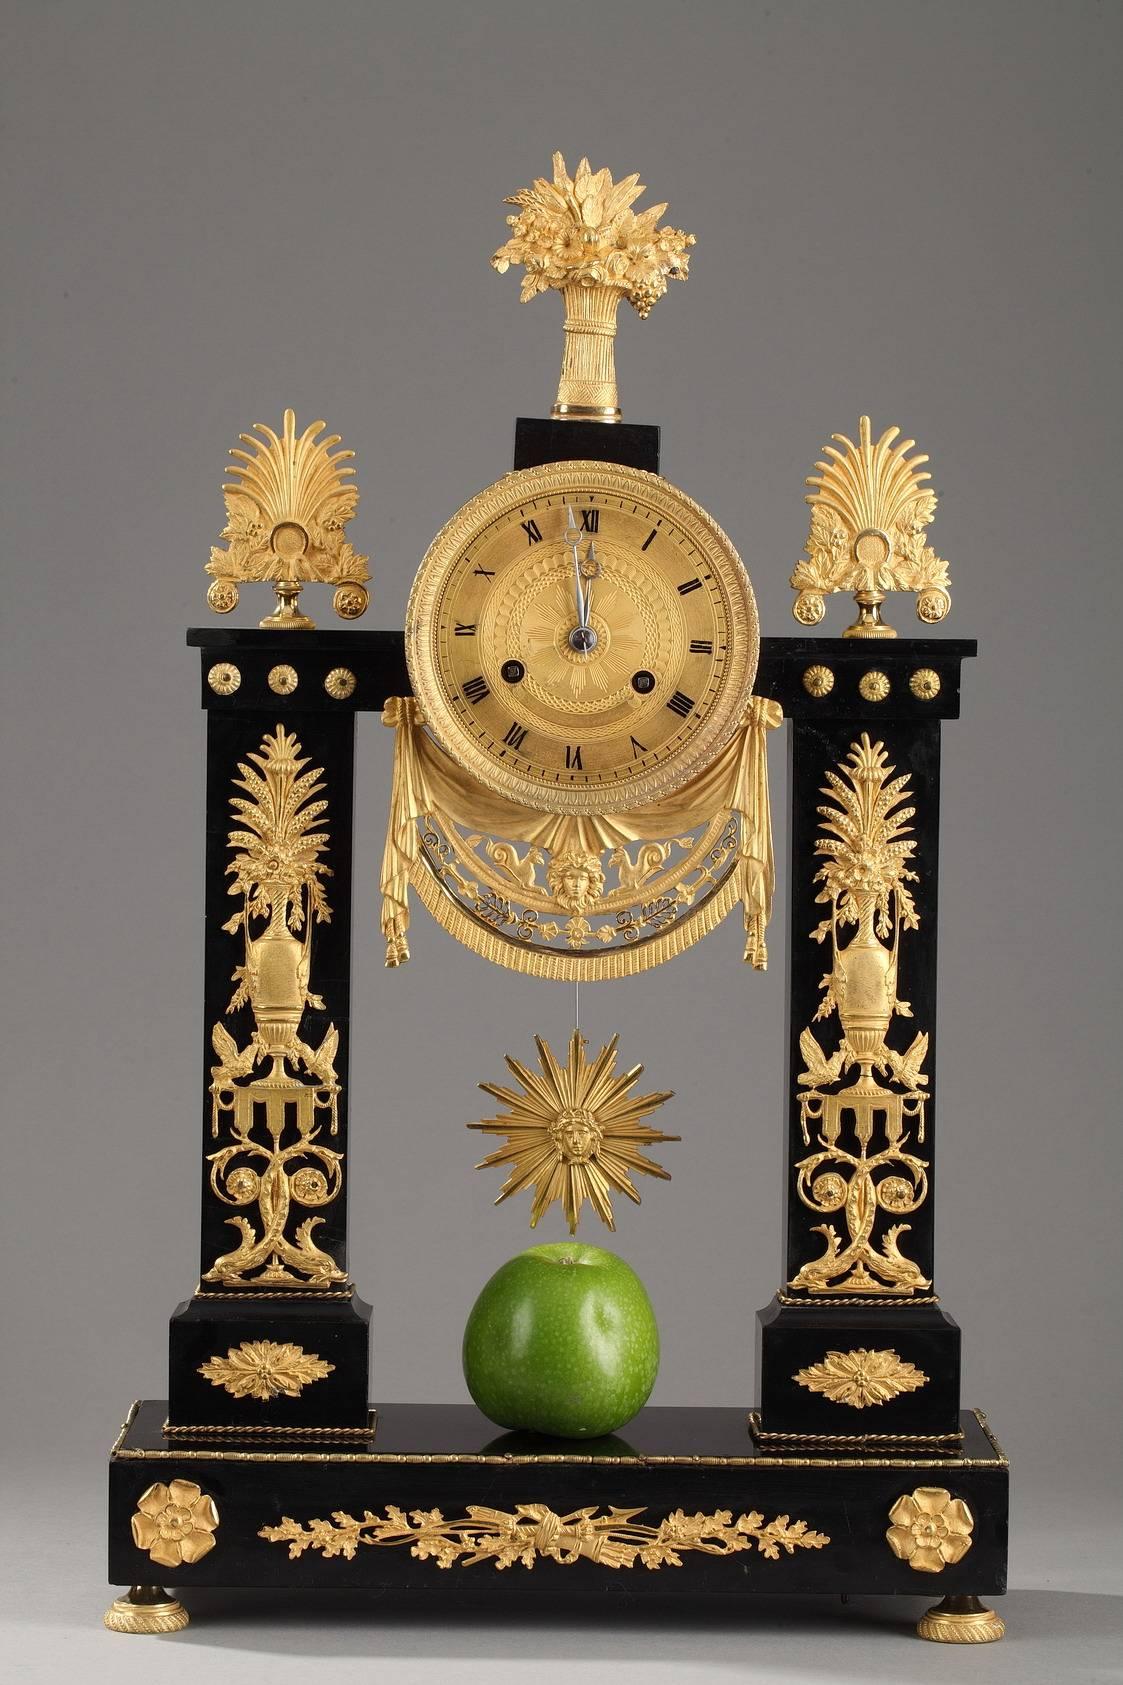 Portico clock in gilt bronze and marble, decorated with flower vases set above canopies, dolphins, and scrollwork. The sculpted, gilt clock face marks the hours in Roman numerals and is bordered with water leaf and small beads. It is set above an